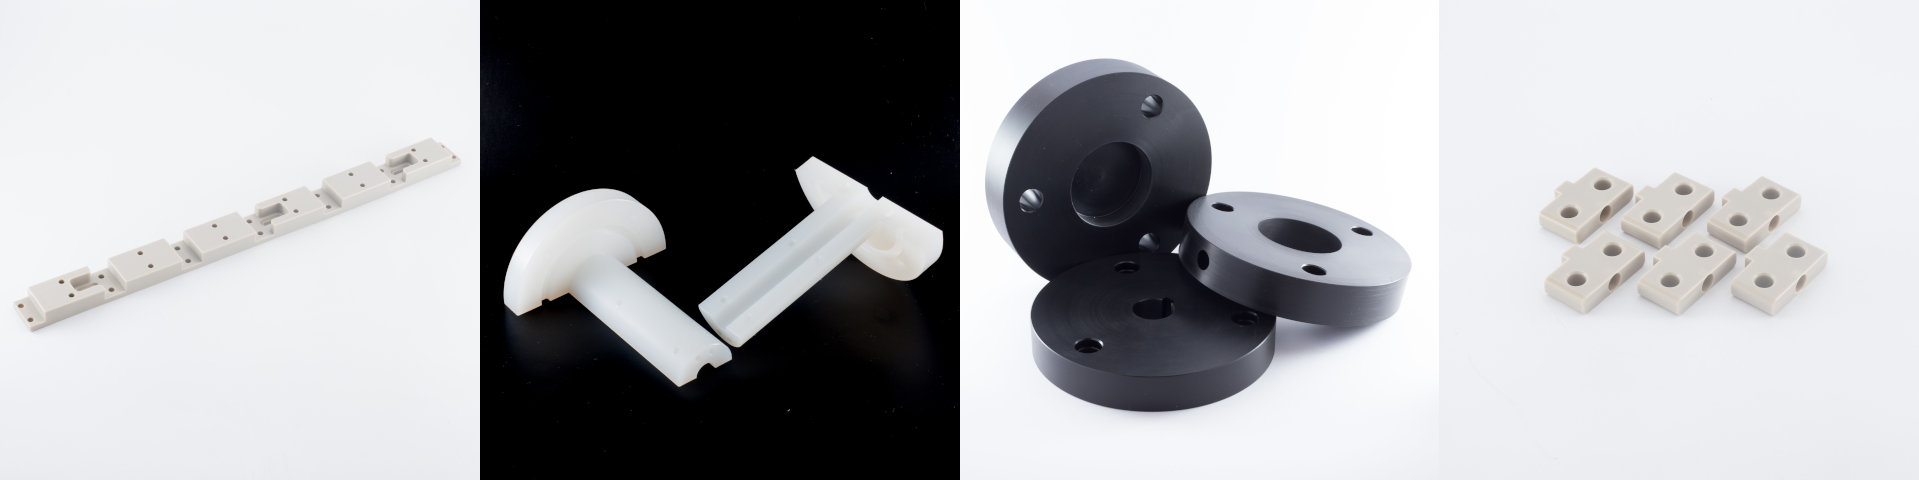 Sequence of CNC machined parts in engineering plastics